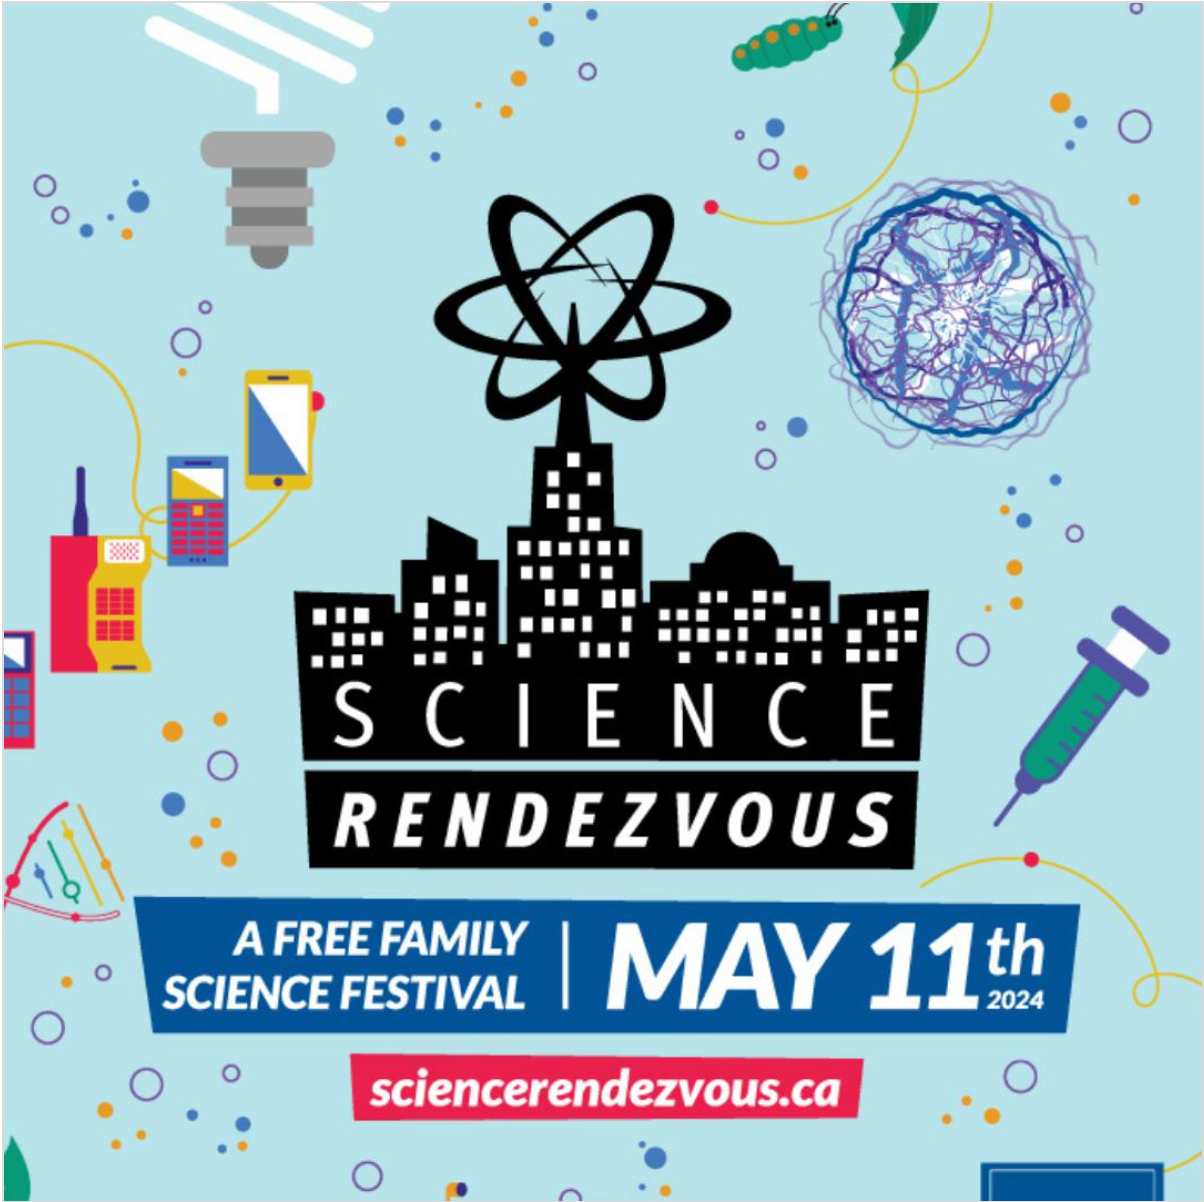 A cartoon graphic advertising science rendezvous 2024